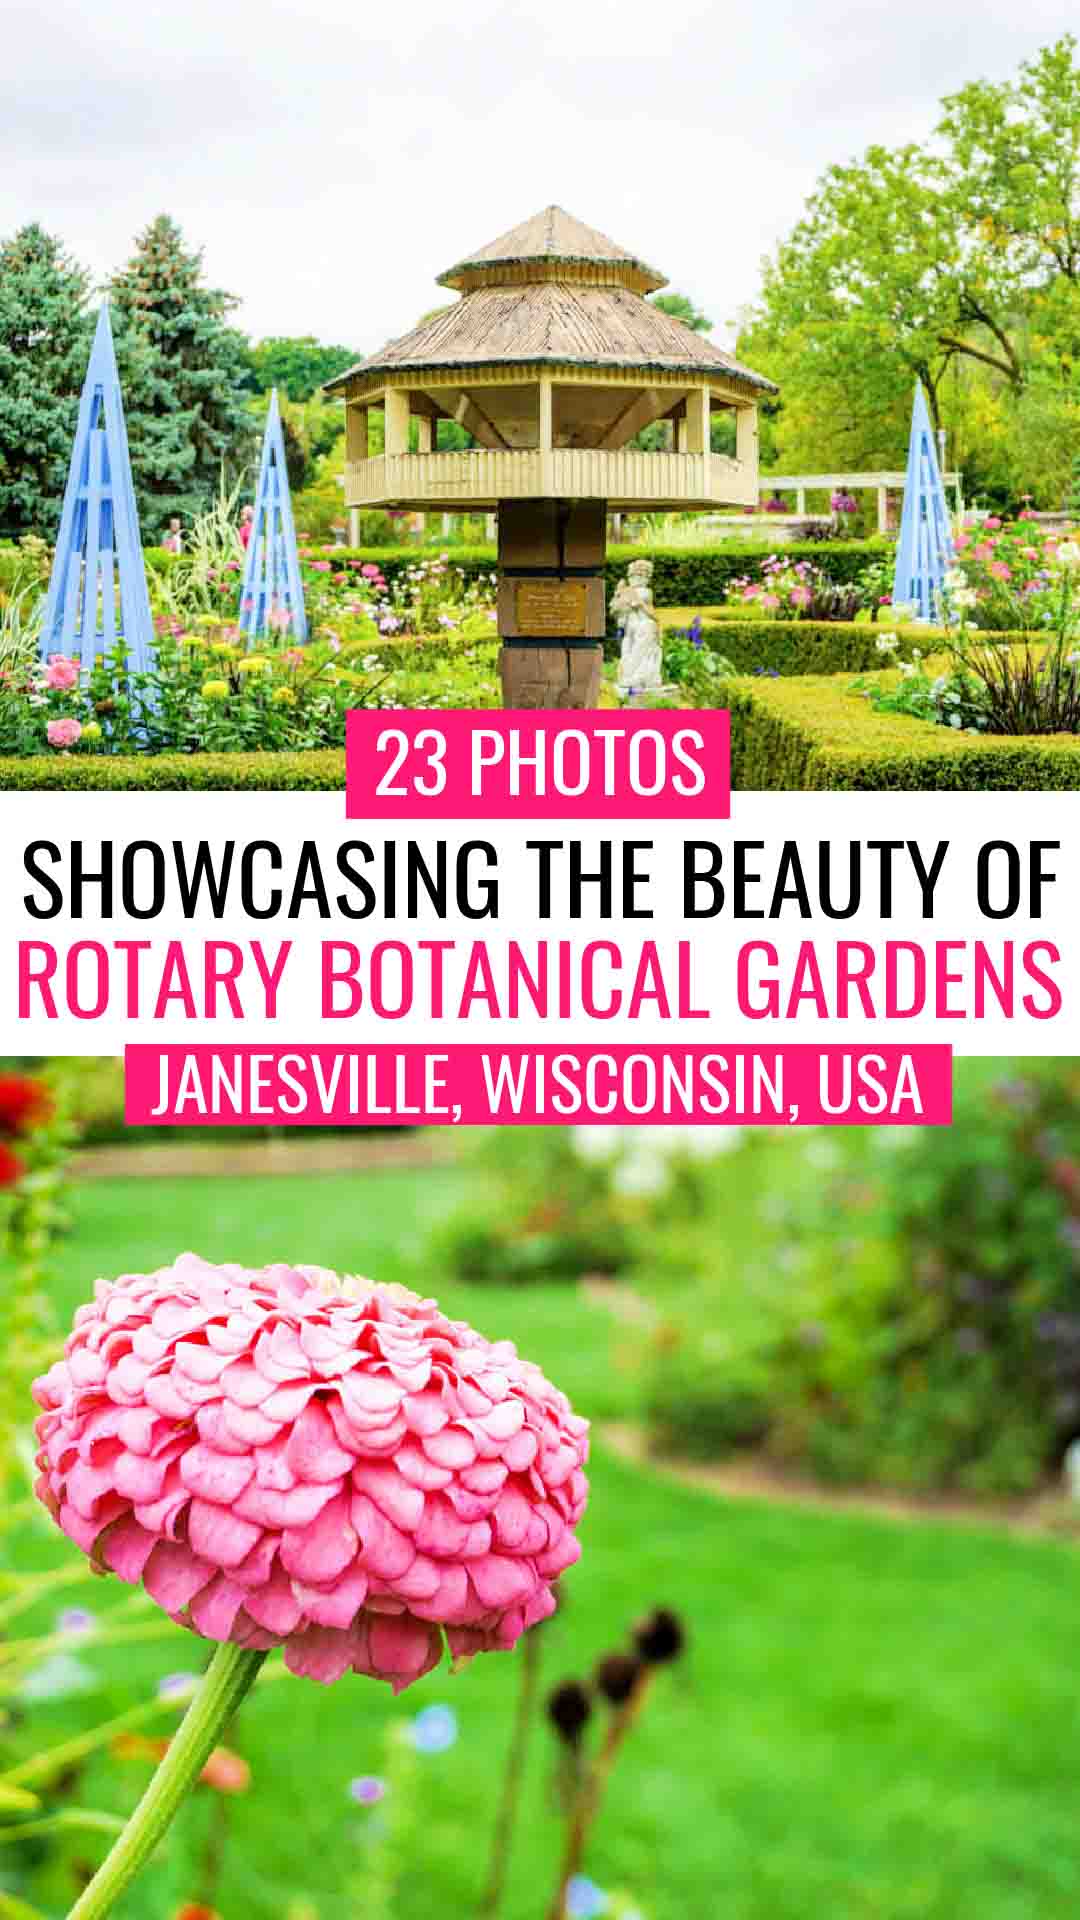 Photos of English Cottage Garden and pink flower with text stating "23 Photos Showcasing the Beauty of Rotary Botanical Gardens, Janesville, Wisconsin, USA